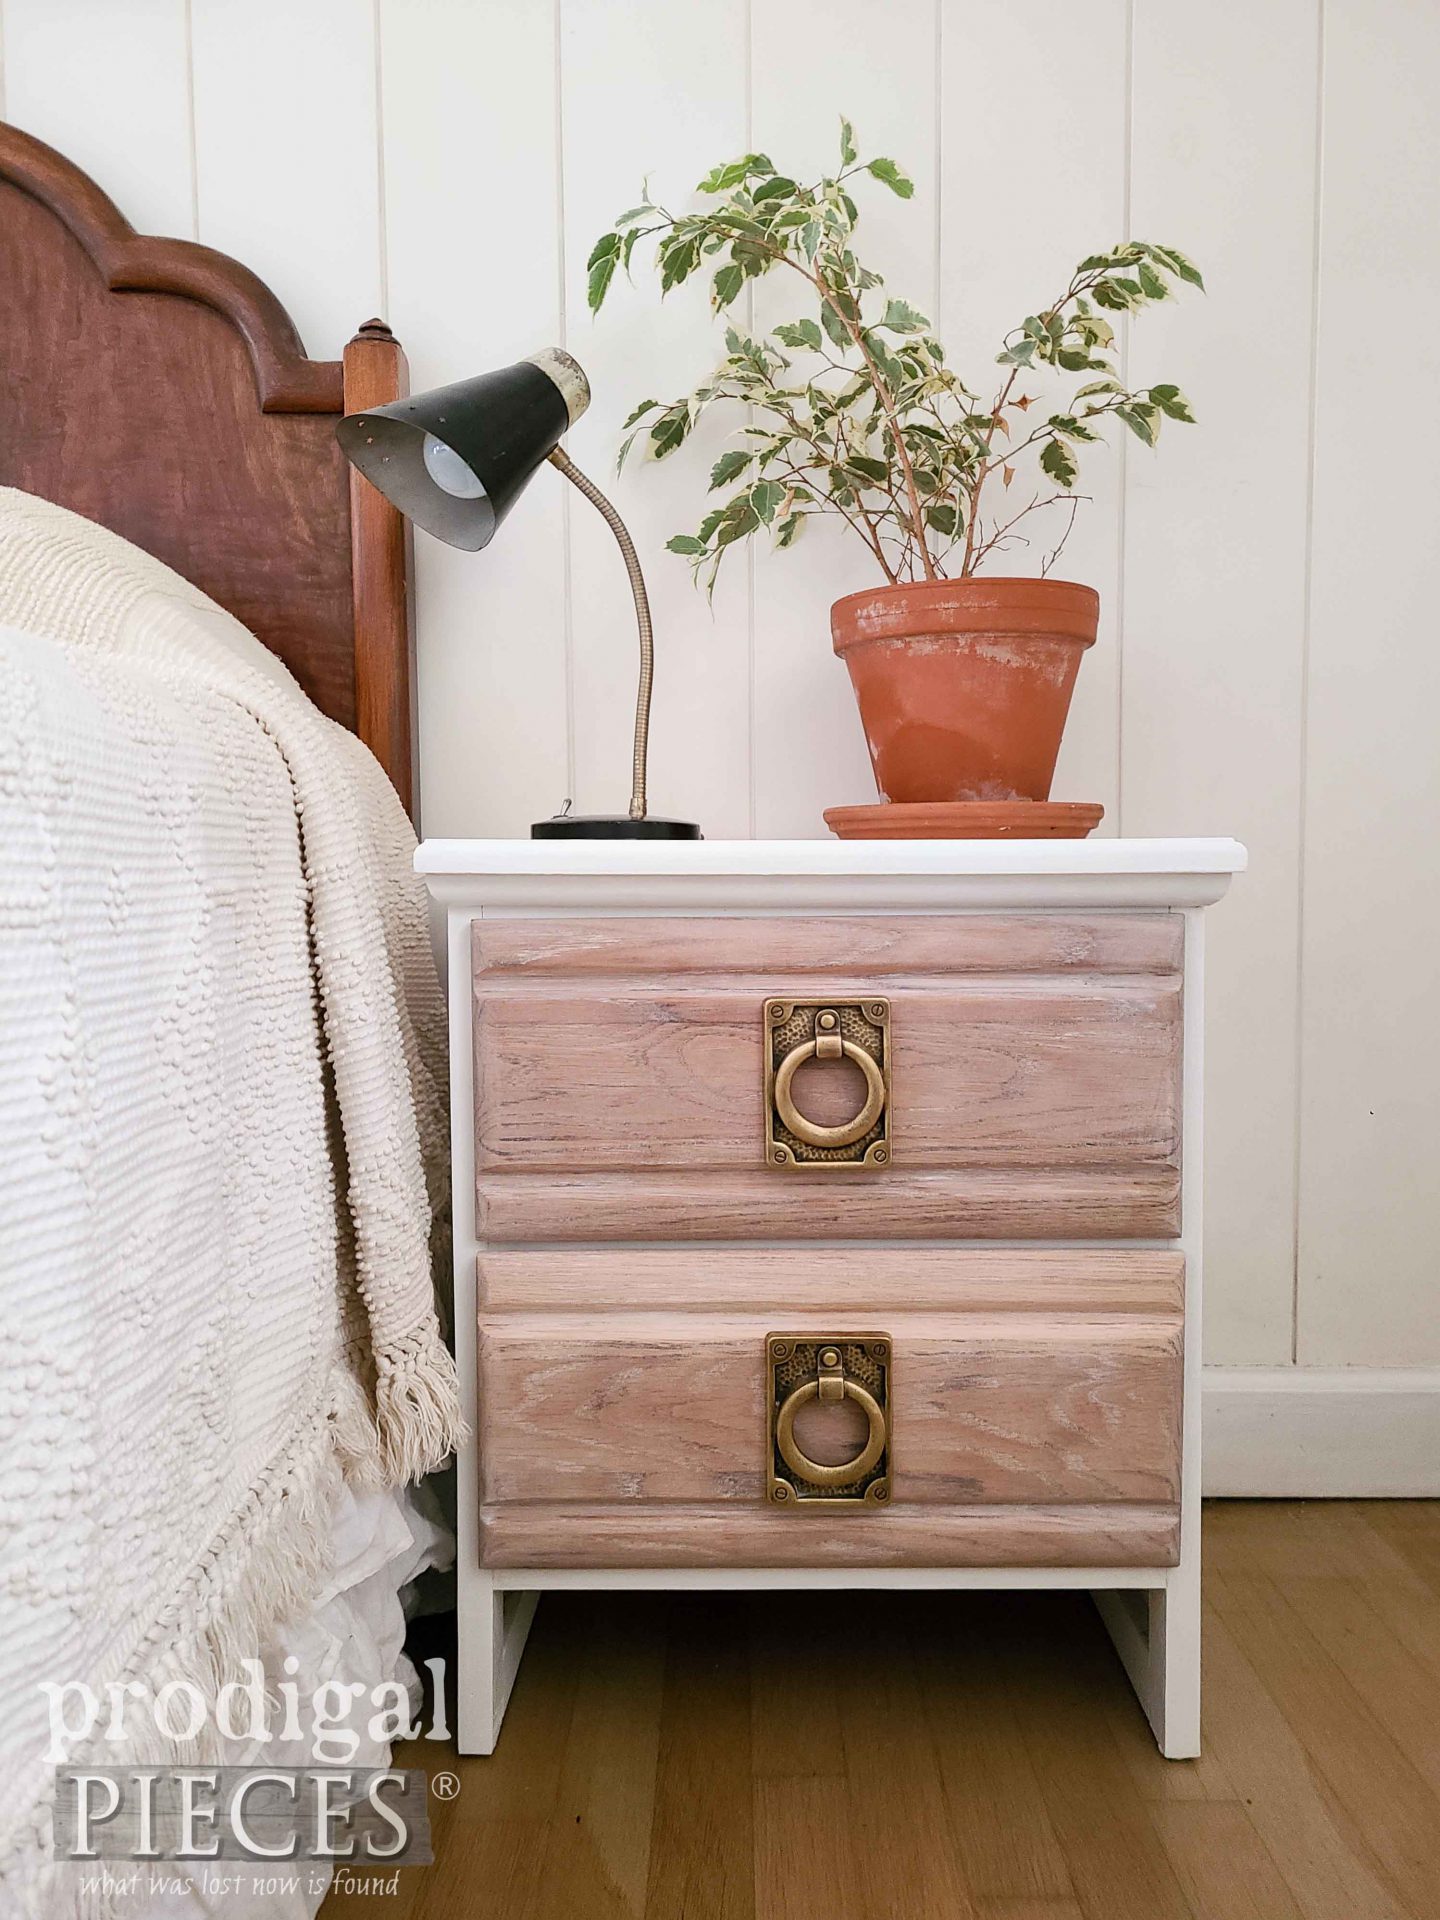 Updated Vintage Nightstand into Boho Chic by Larissa of Prodigal Pieces | prodigalpieces.com #prodigalpieces #vintage #boho #furniture